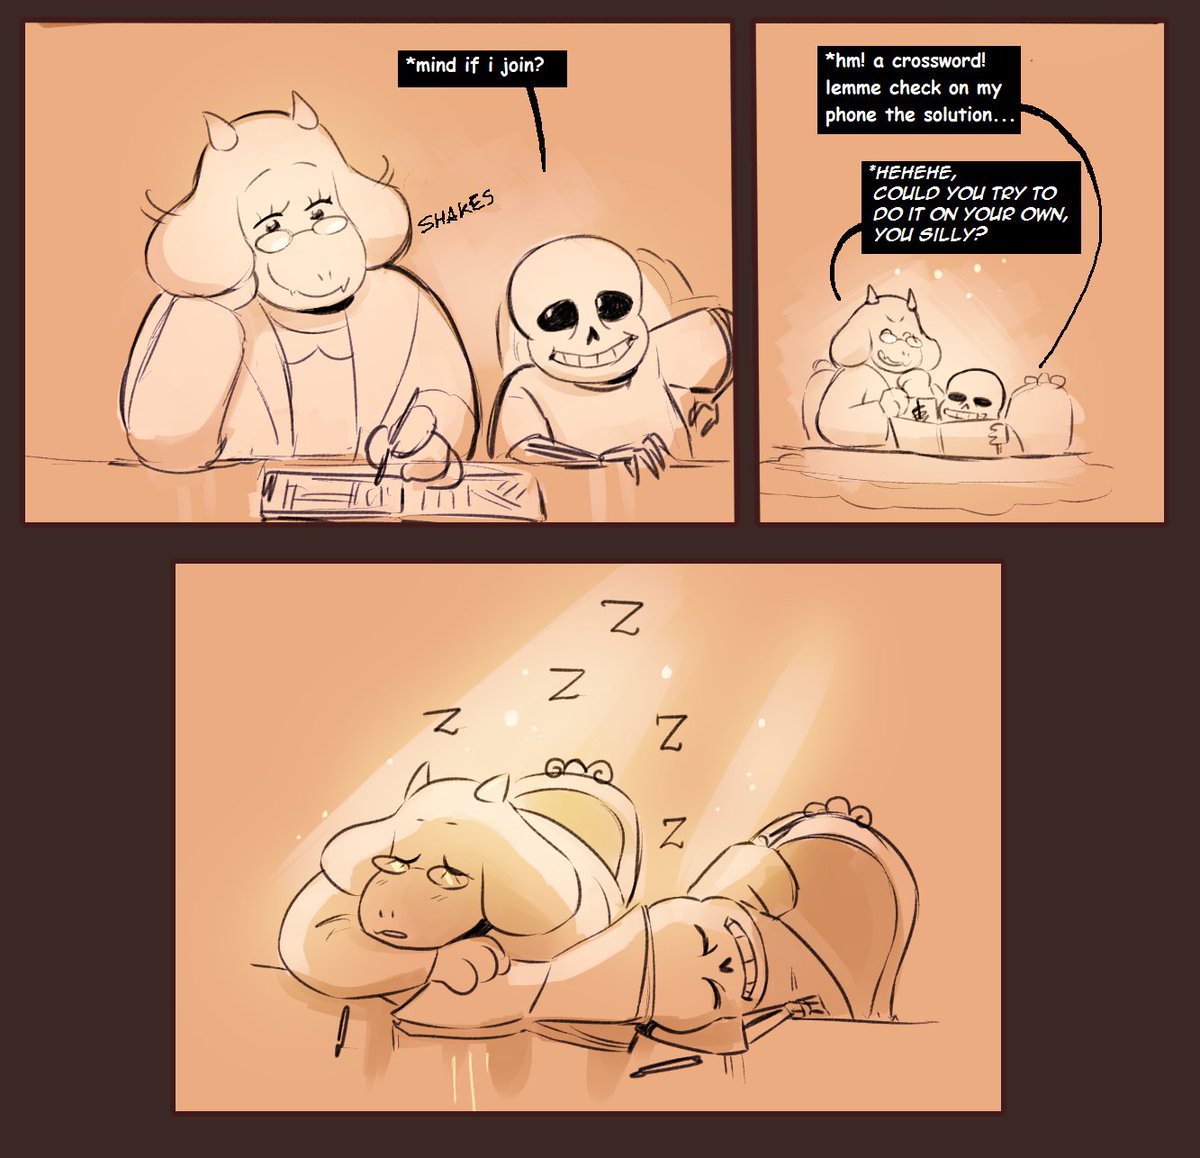 "Old habits die hard"

I think I hadn't put this small Undertale comic here, I drew this some time ago too, but here it goes! 